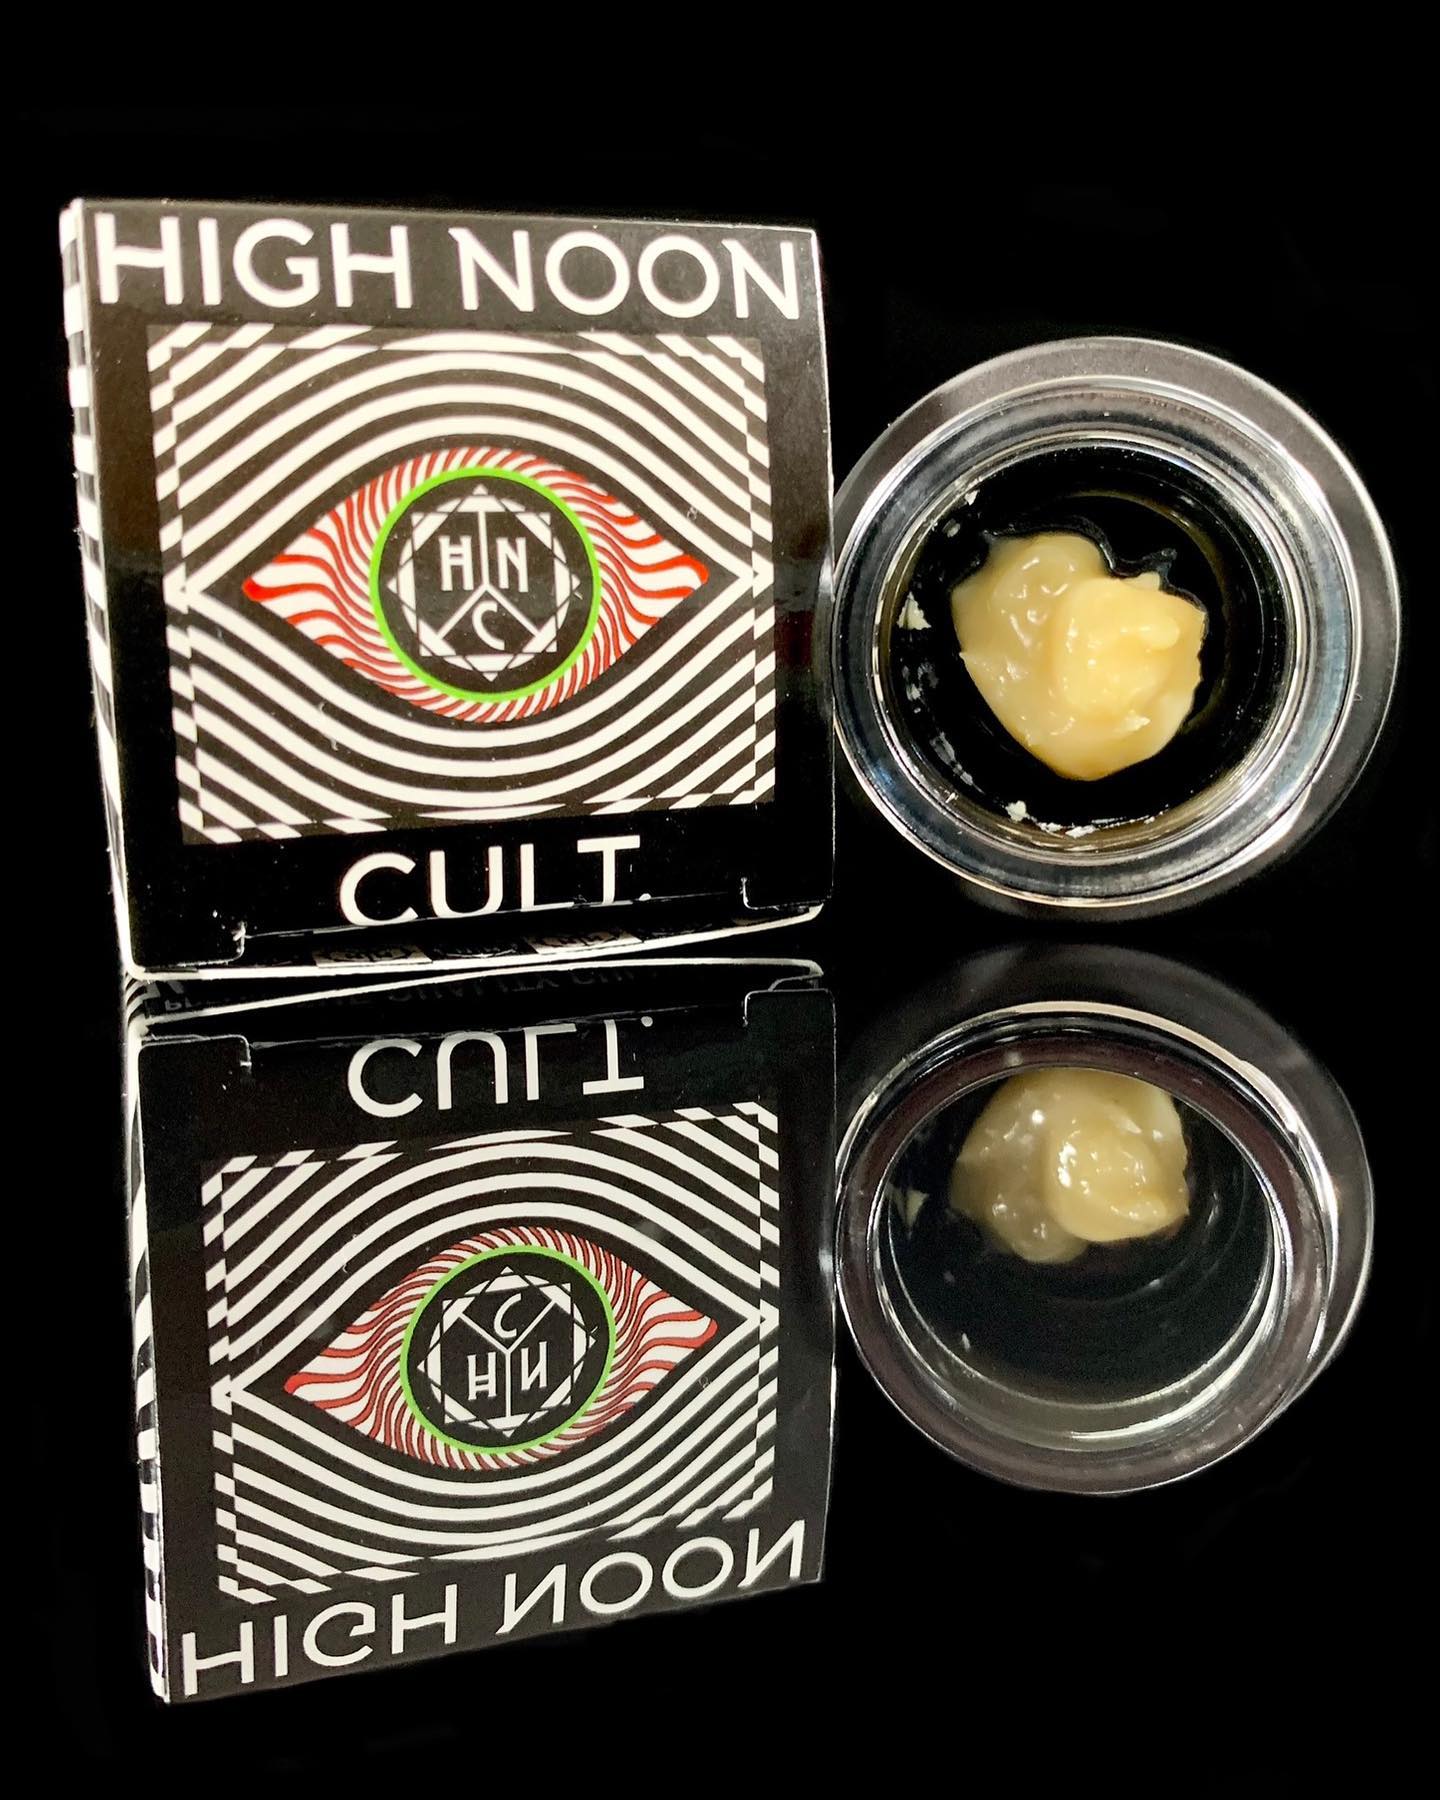 Hash Review: Neapolitan Rosin by WCA x PureMelt - The Highest Critic